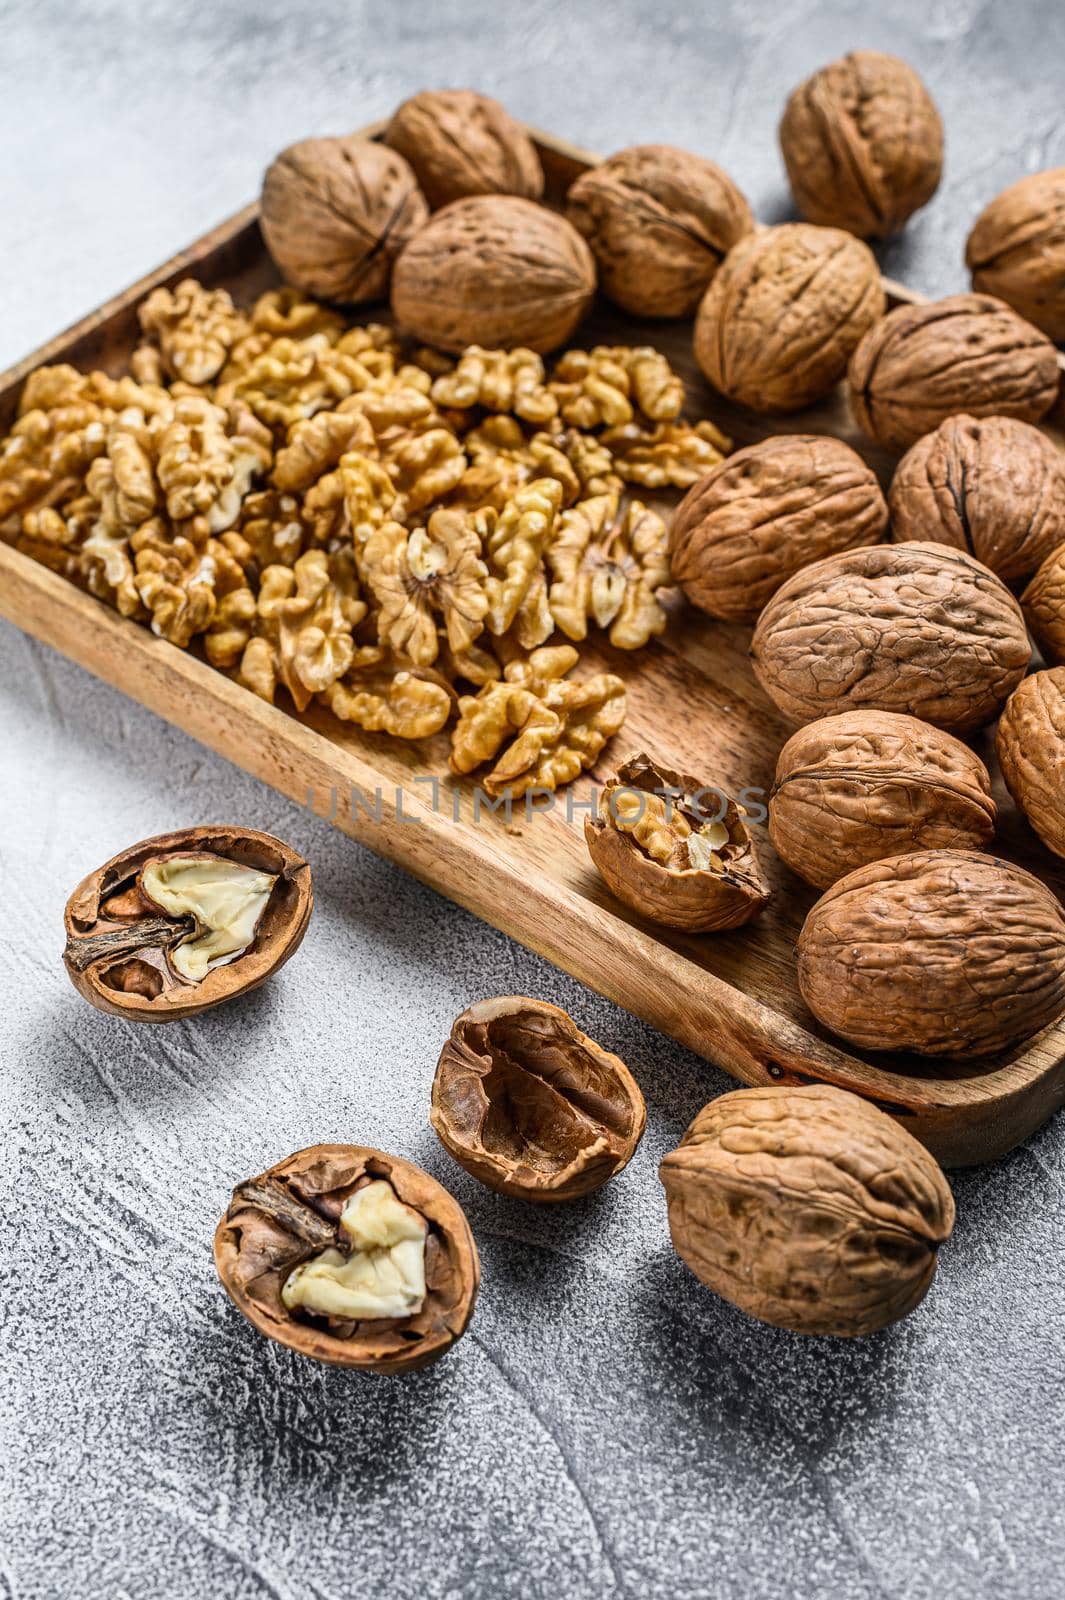 Walnuts in a wooden plate and walnut kernels. Gray background. Top view.